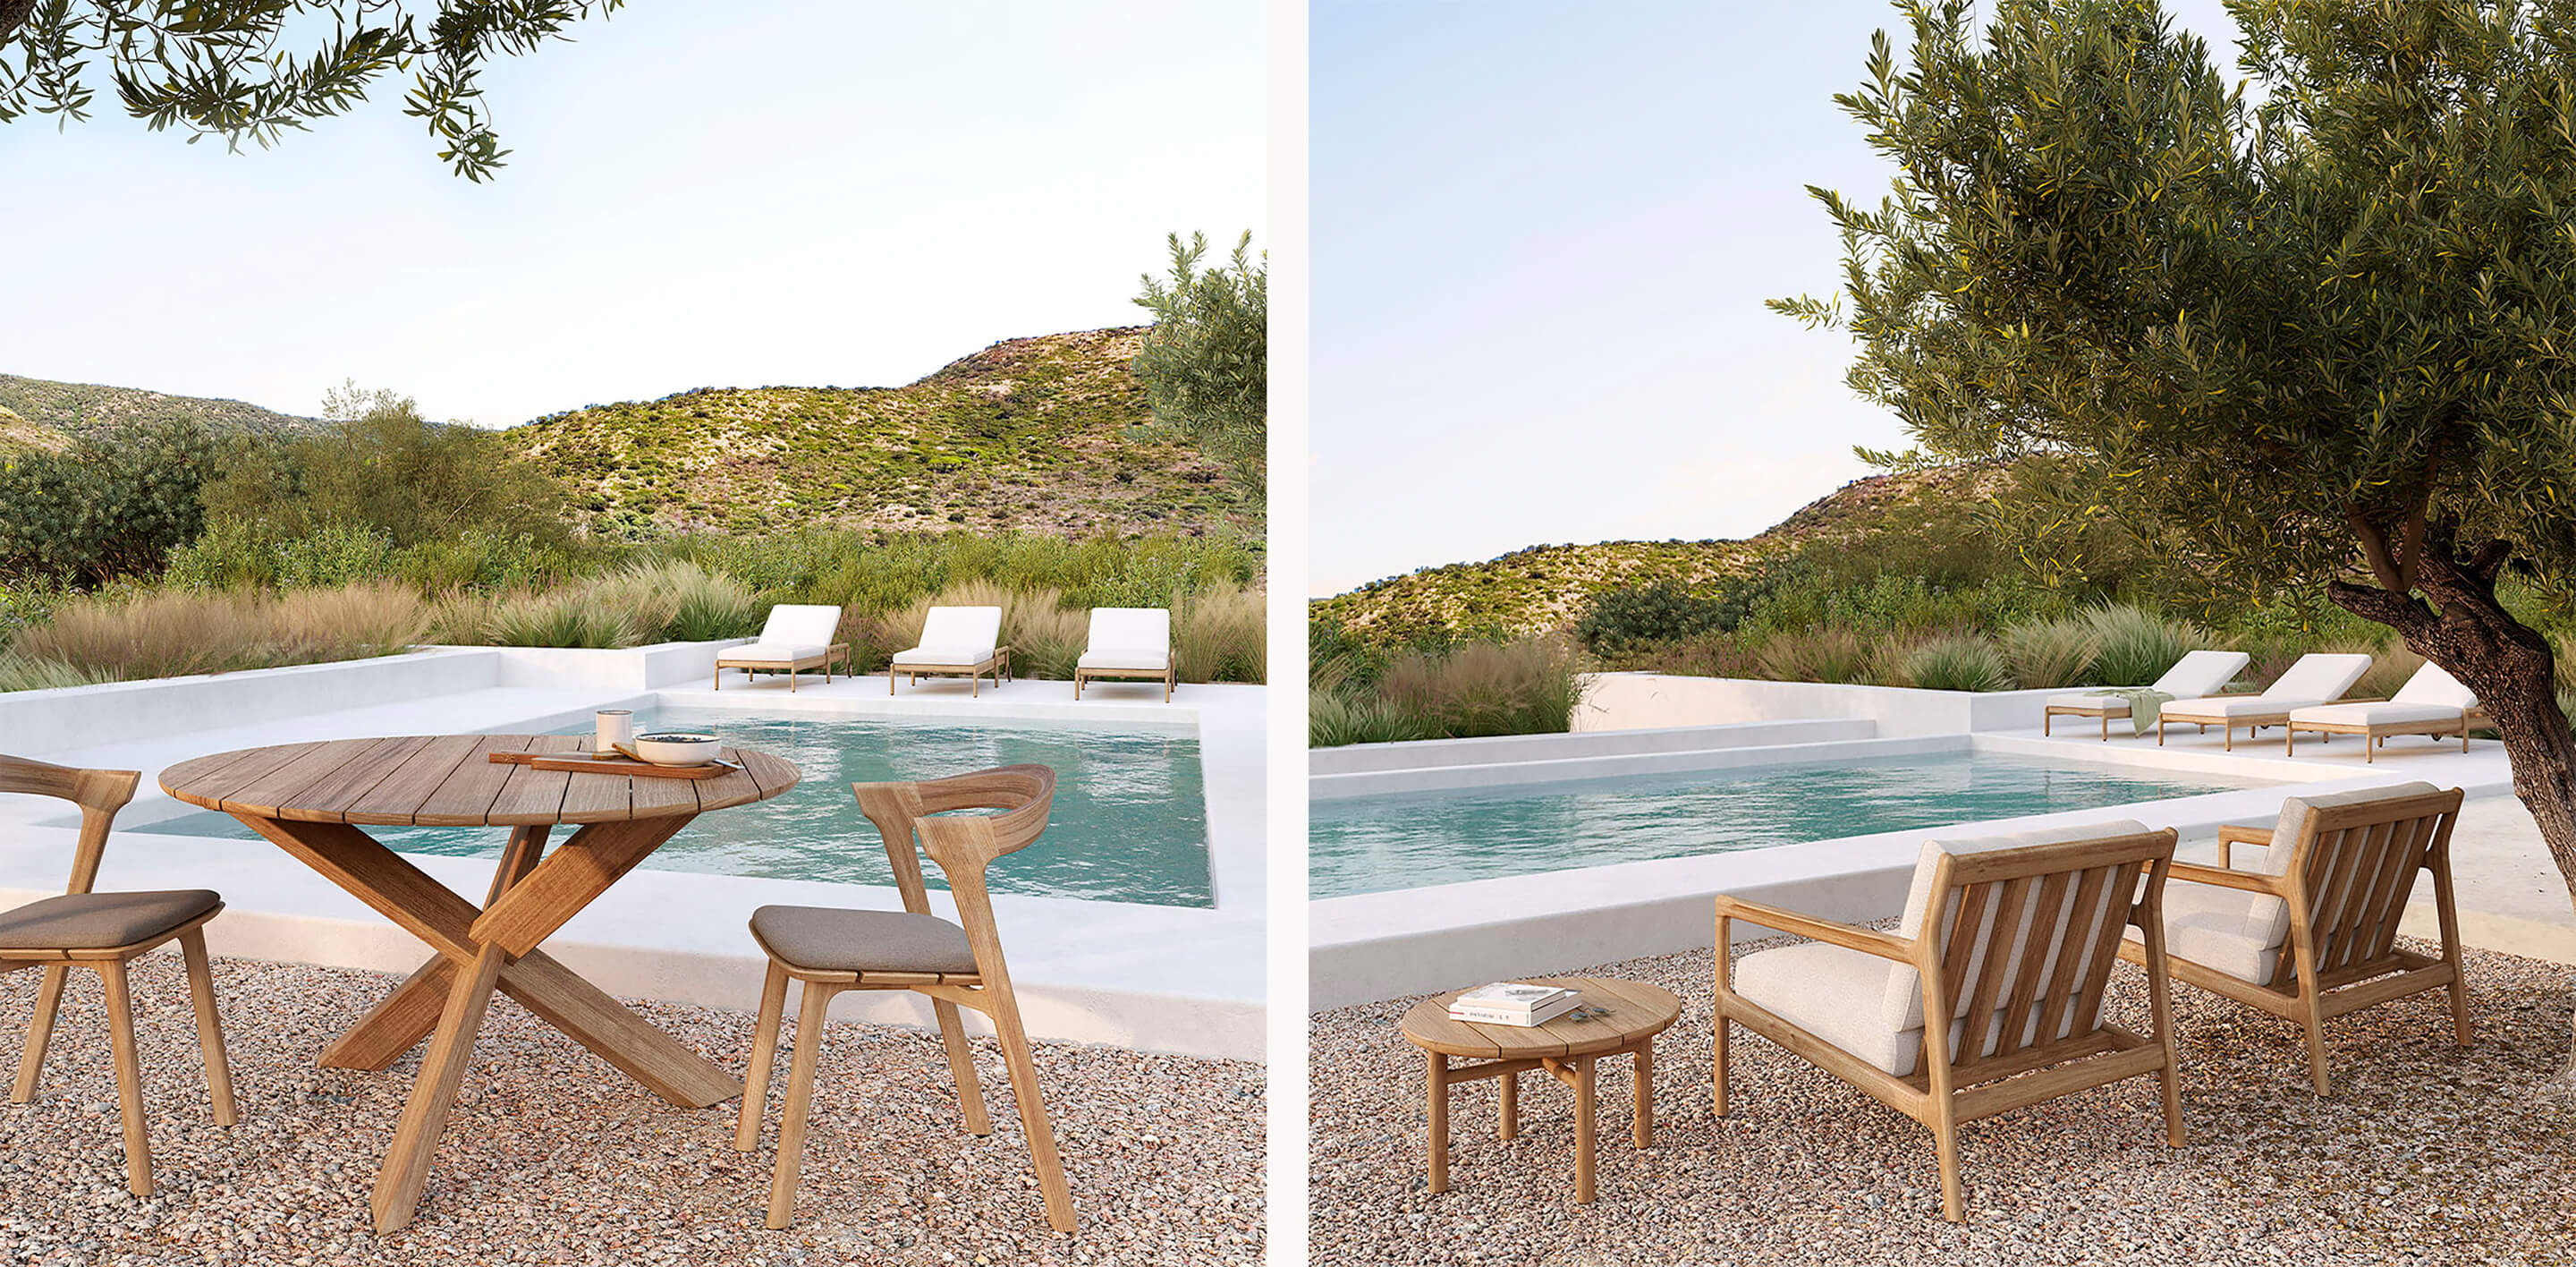 Enjoy your alfresco and outdoor spaces and soak in the sun in style with the new and inviting selection of outdoor furniture by Ethnicraft, including outdoor dining tables, dining chairs, and lounge chairs.